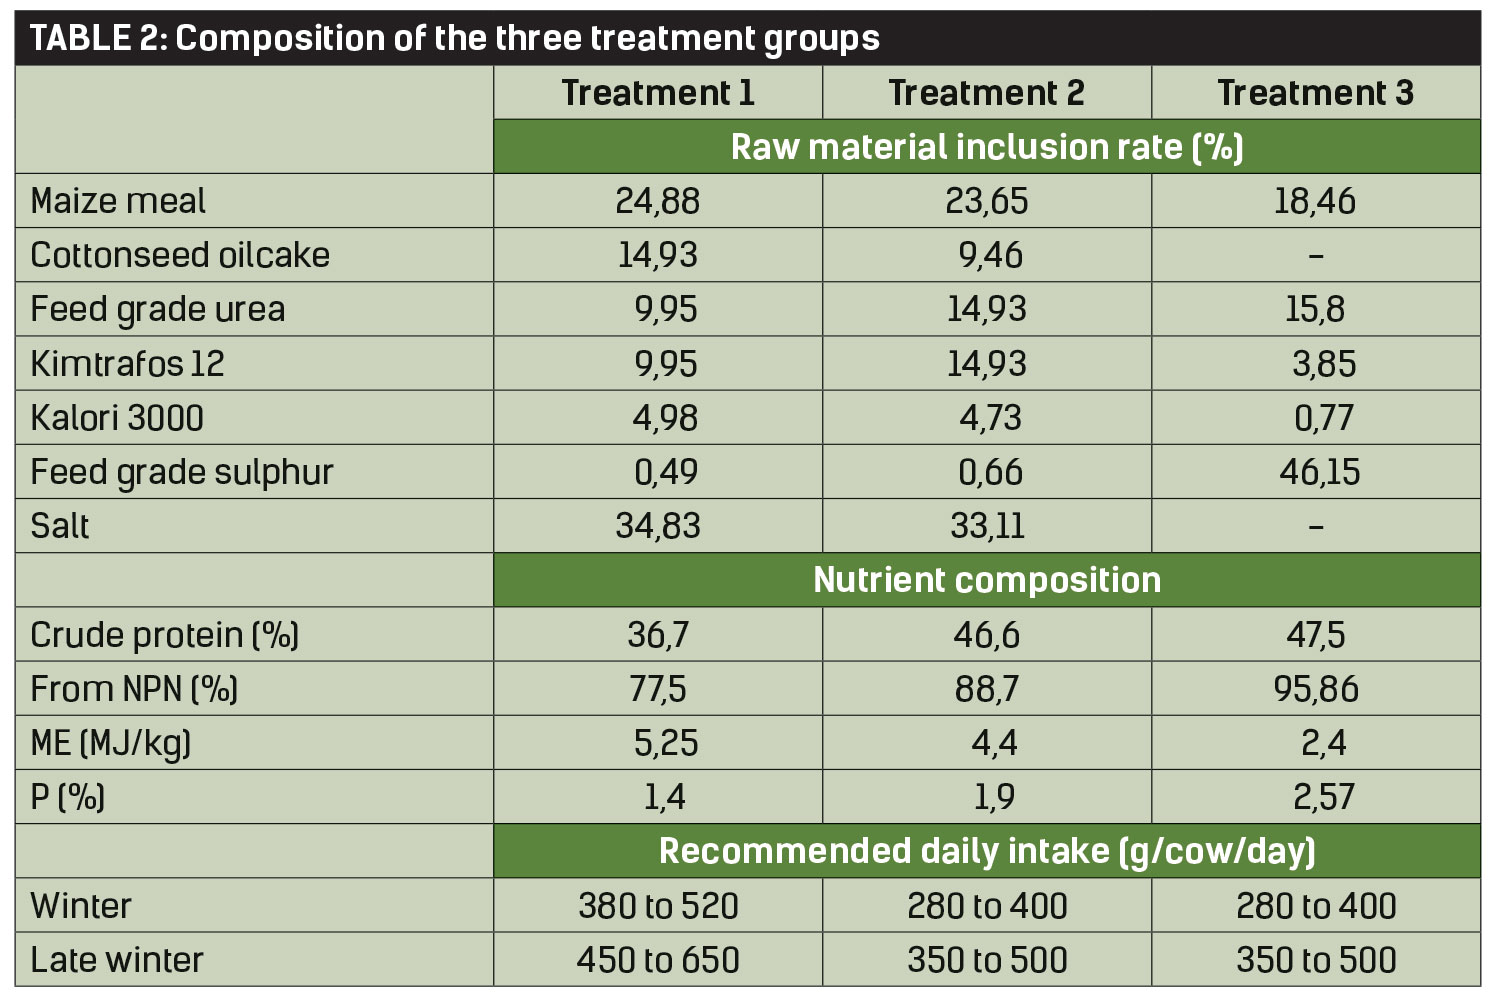 TABLE 2: Composition of the three treatment groups